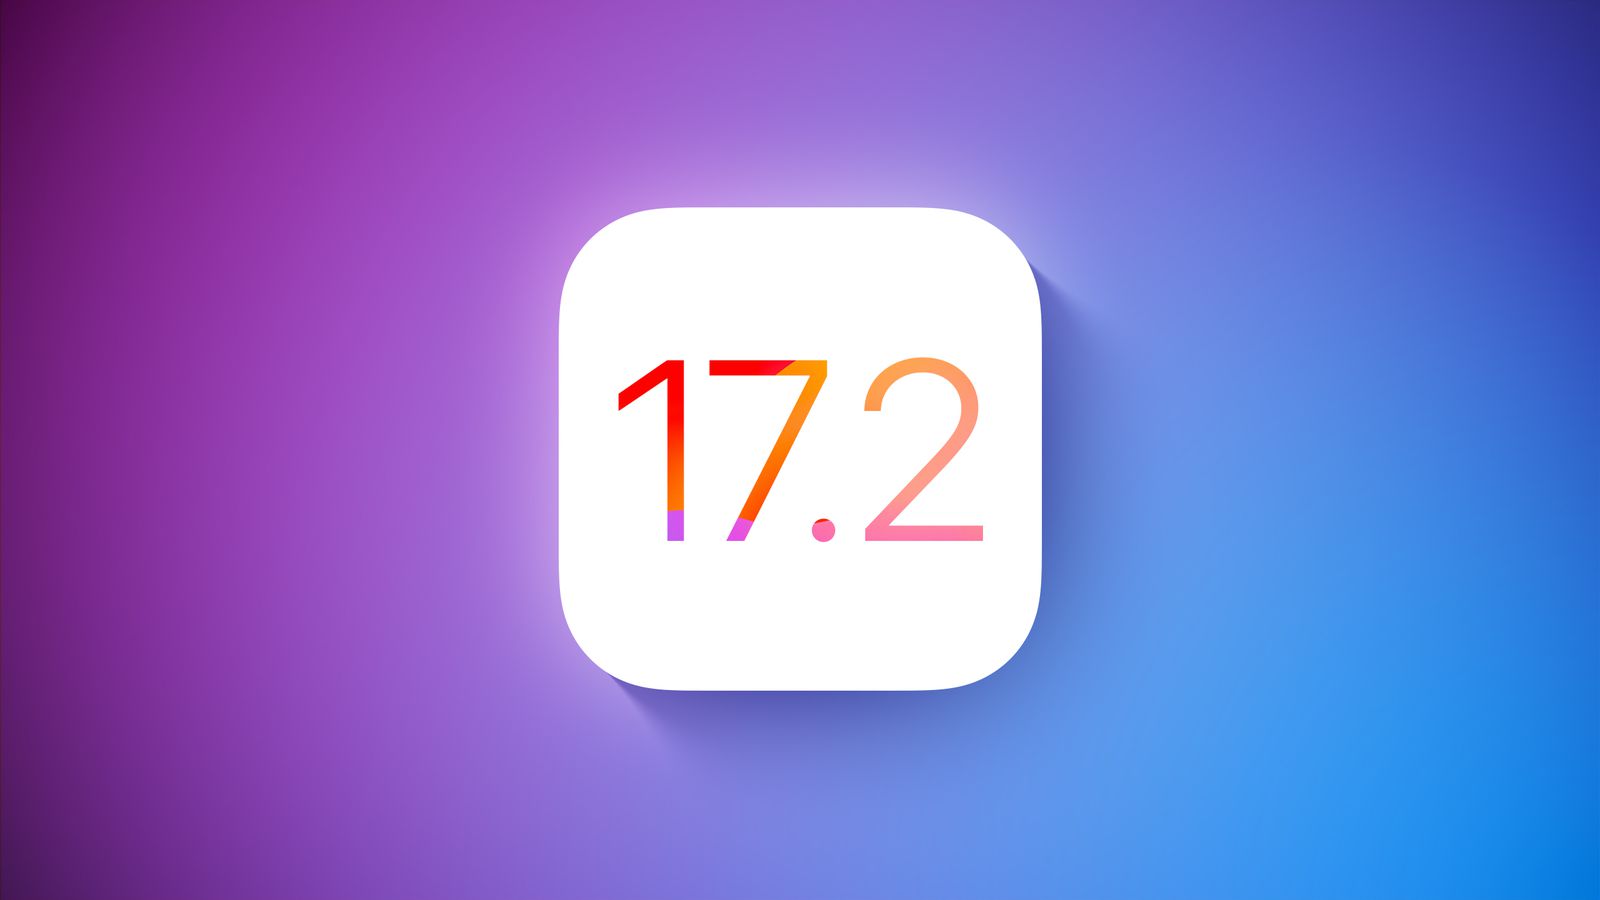 Apple Releases Final Beta Version of iOS 17.2